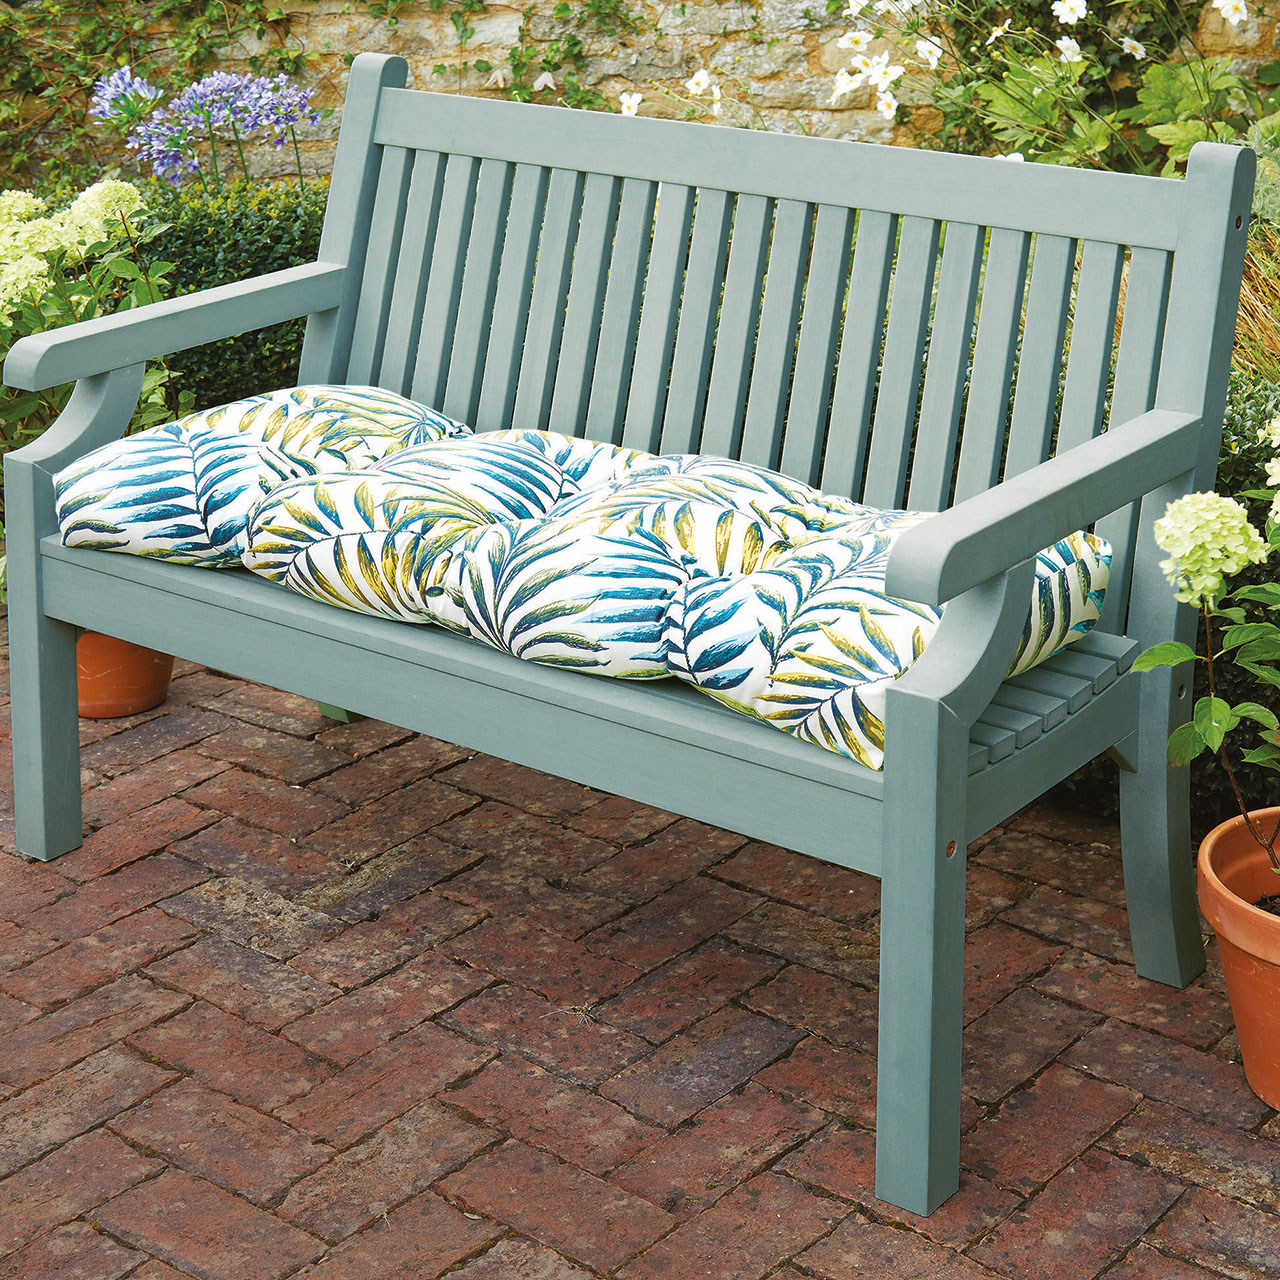 Garden Bench Cushion for our Wood-effect Bench